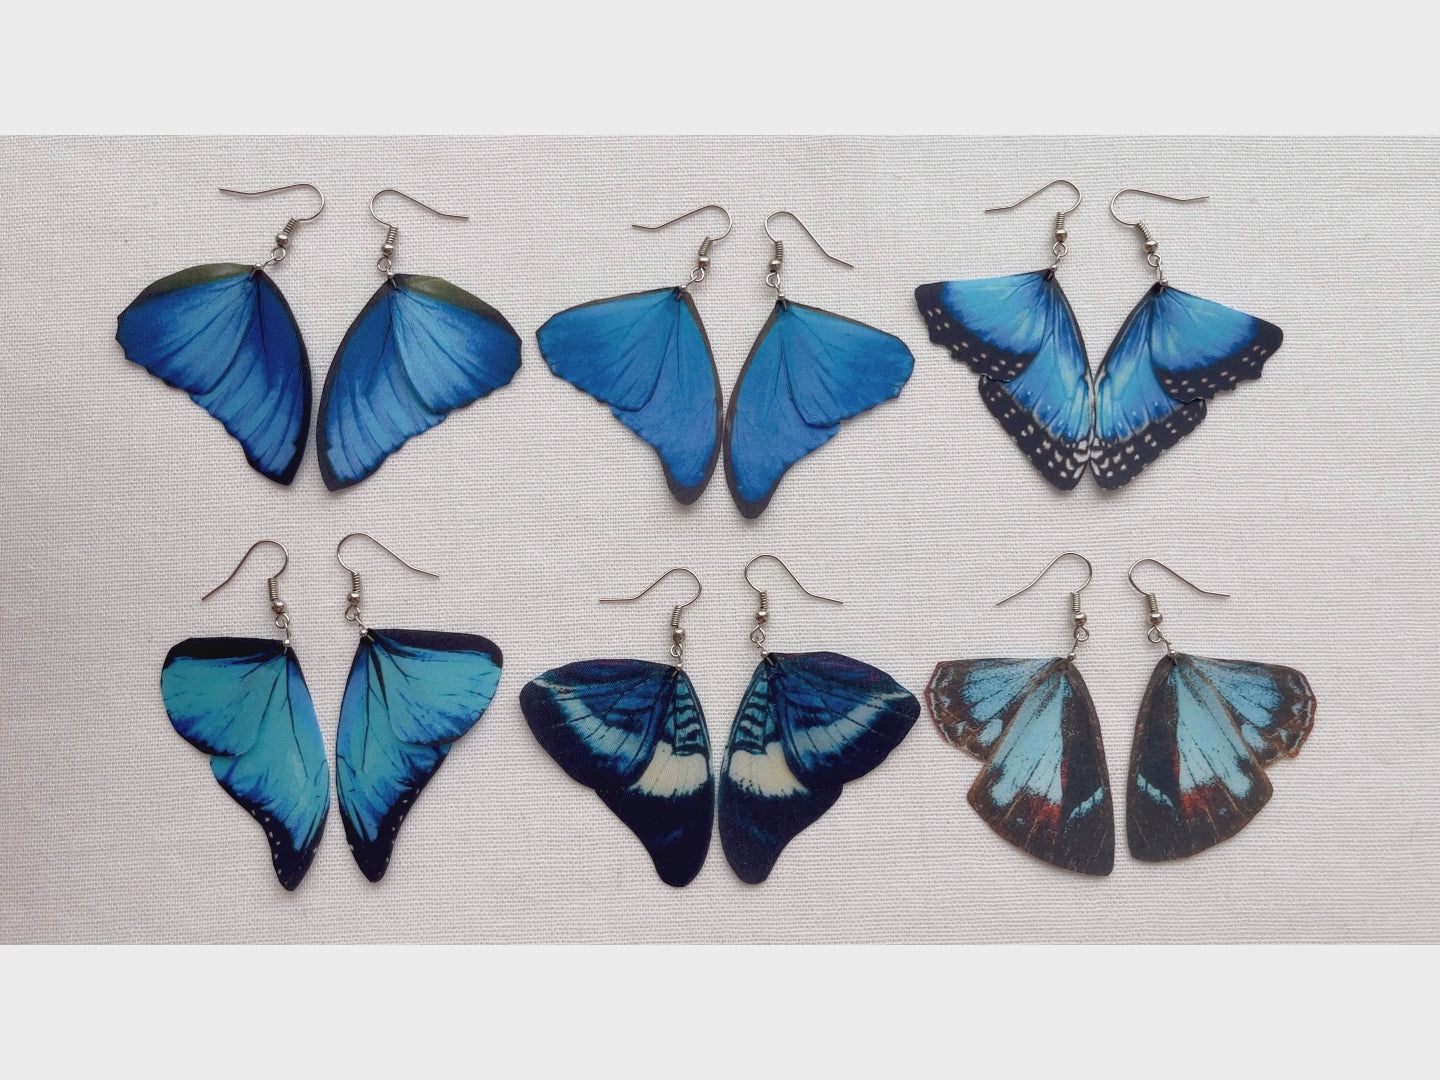 Whimsical fairy wing earrings in shades of blue